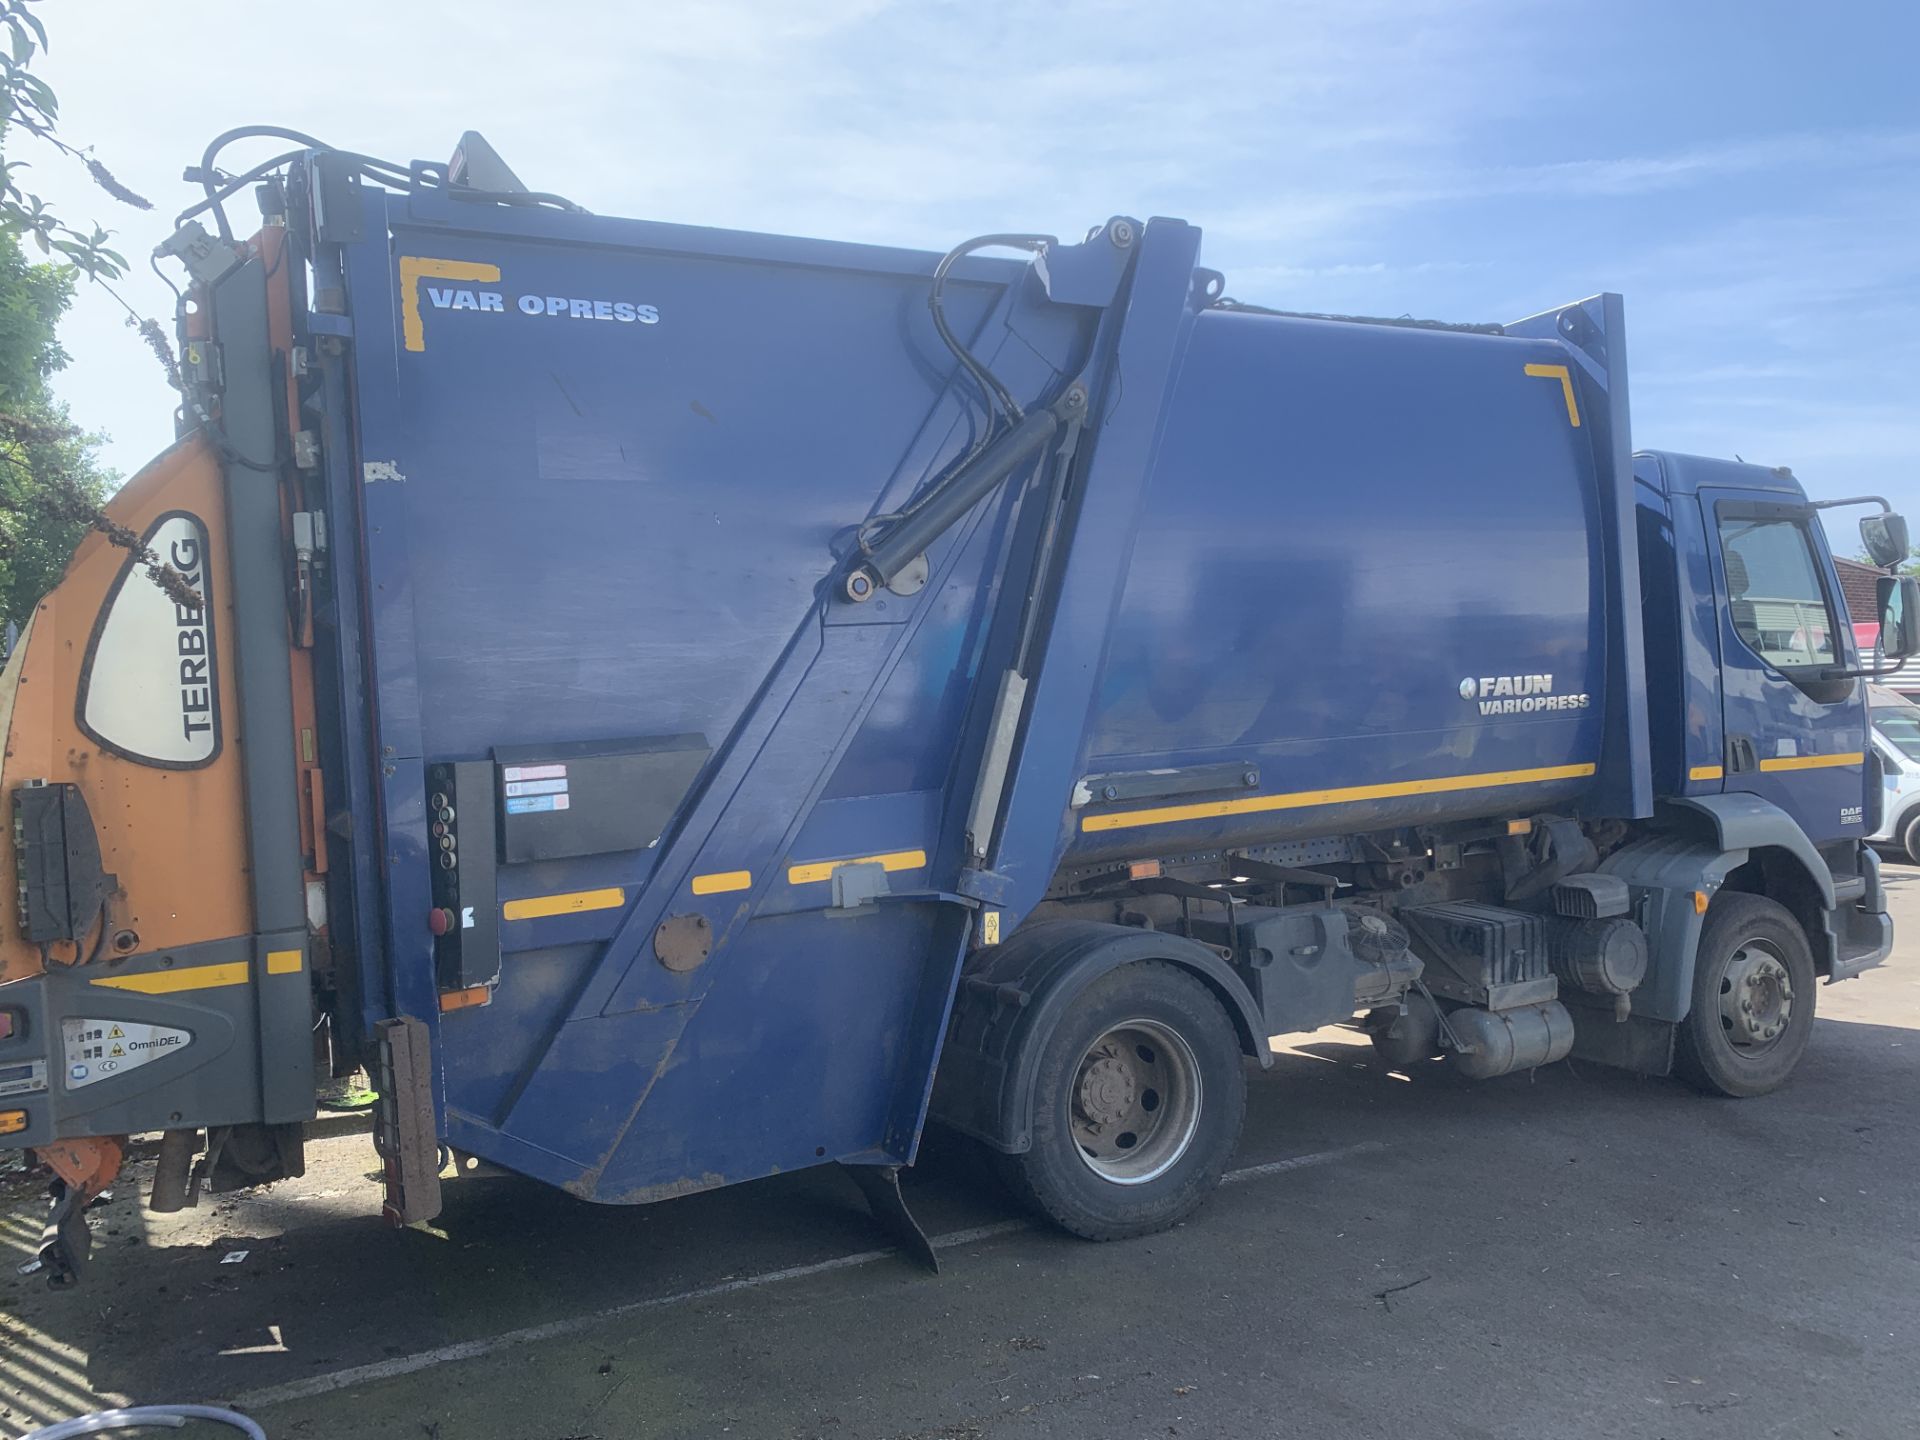 2013 BLUE DAF TRUCKS LF REFUSE COLLECTION VEHICLE - Image 5 of 12